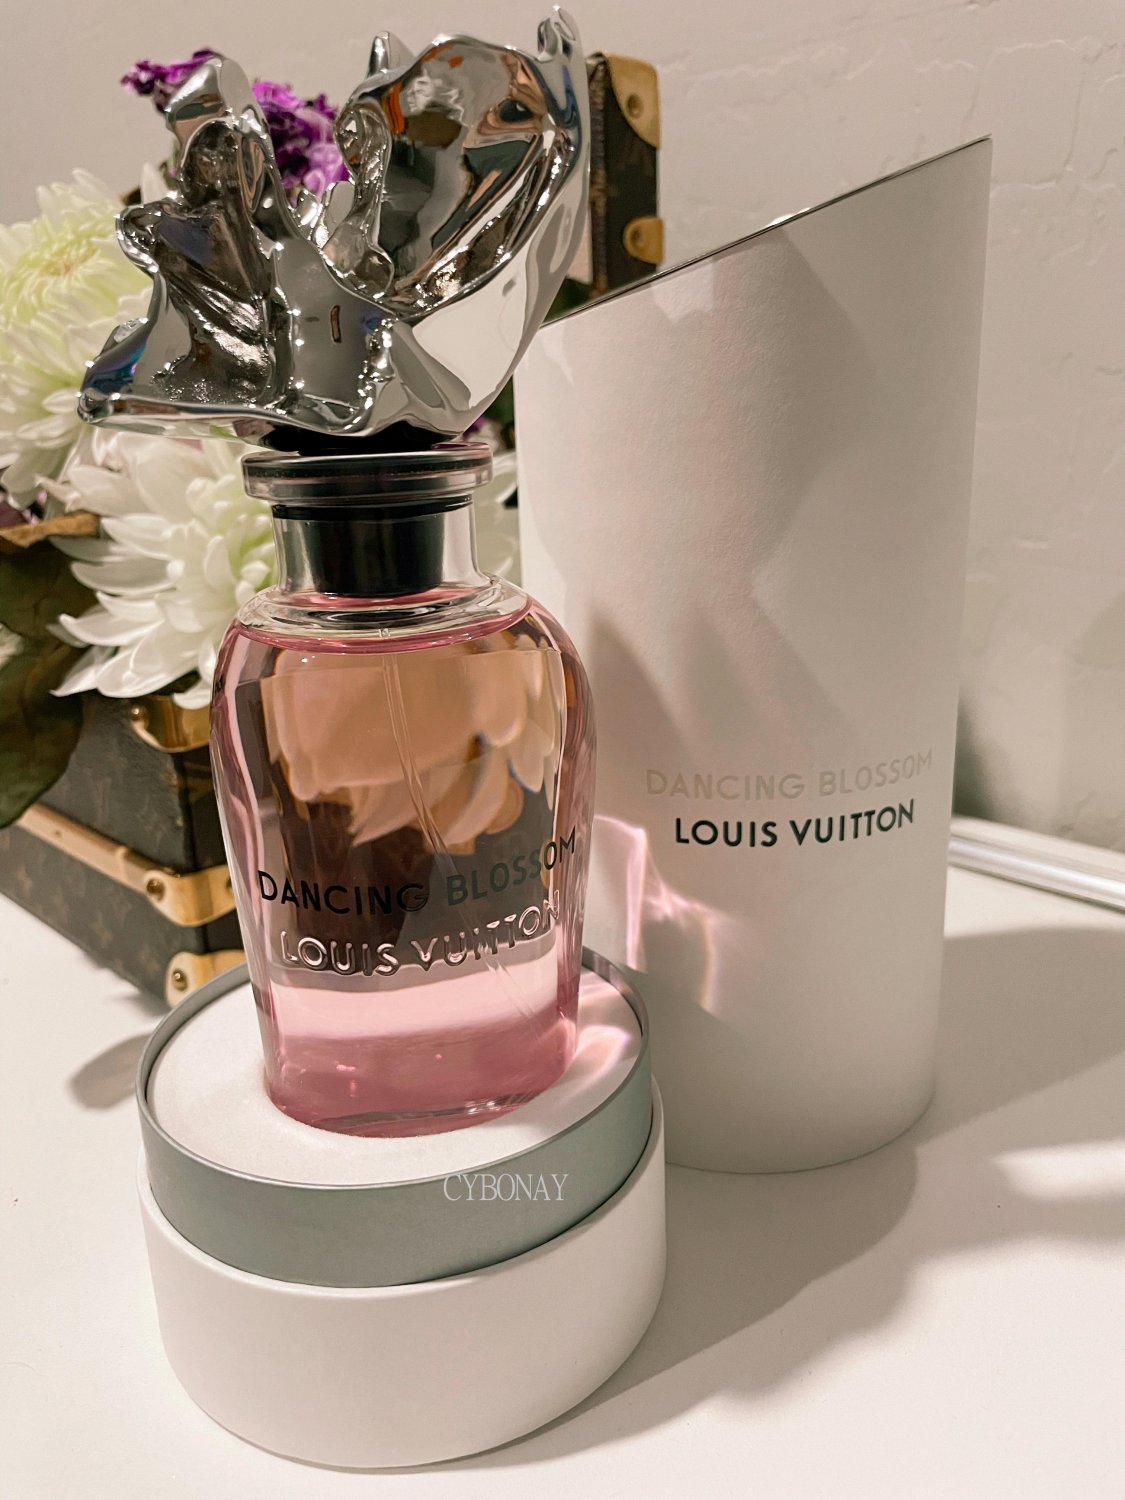 Dancing Blossom Louis Vuitton perfume - a fragrance for women and men 2021